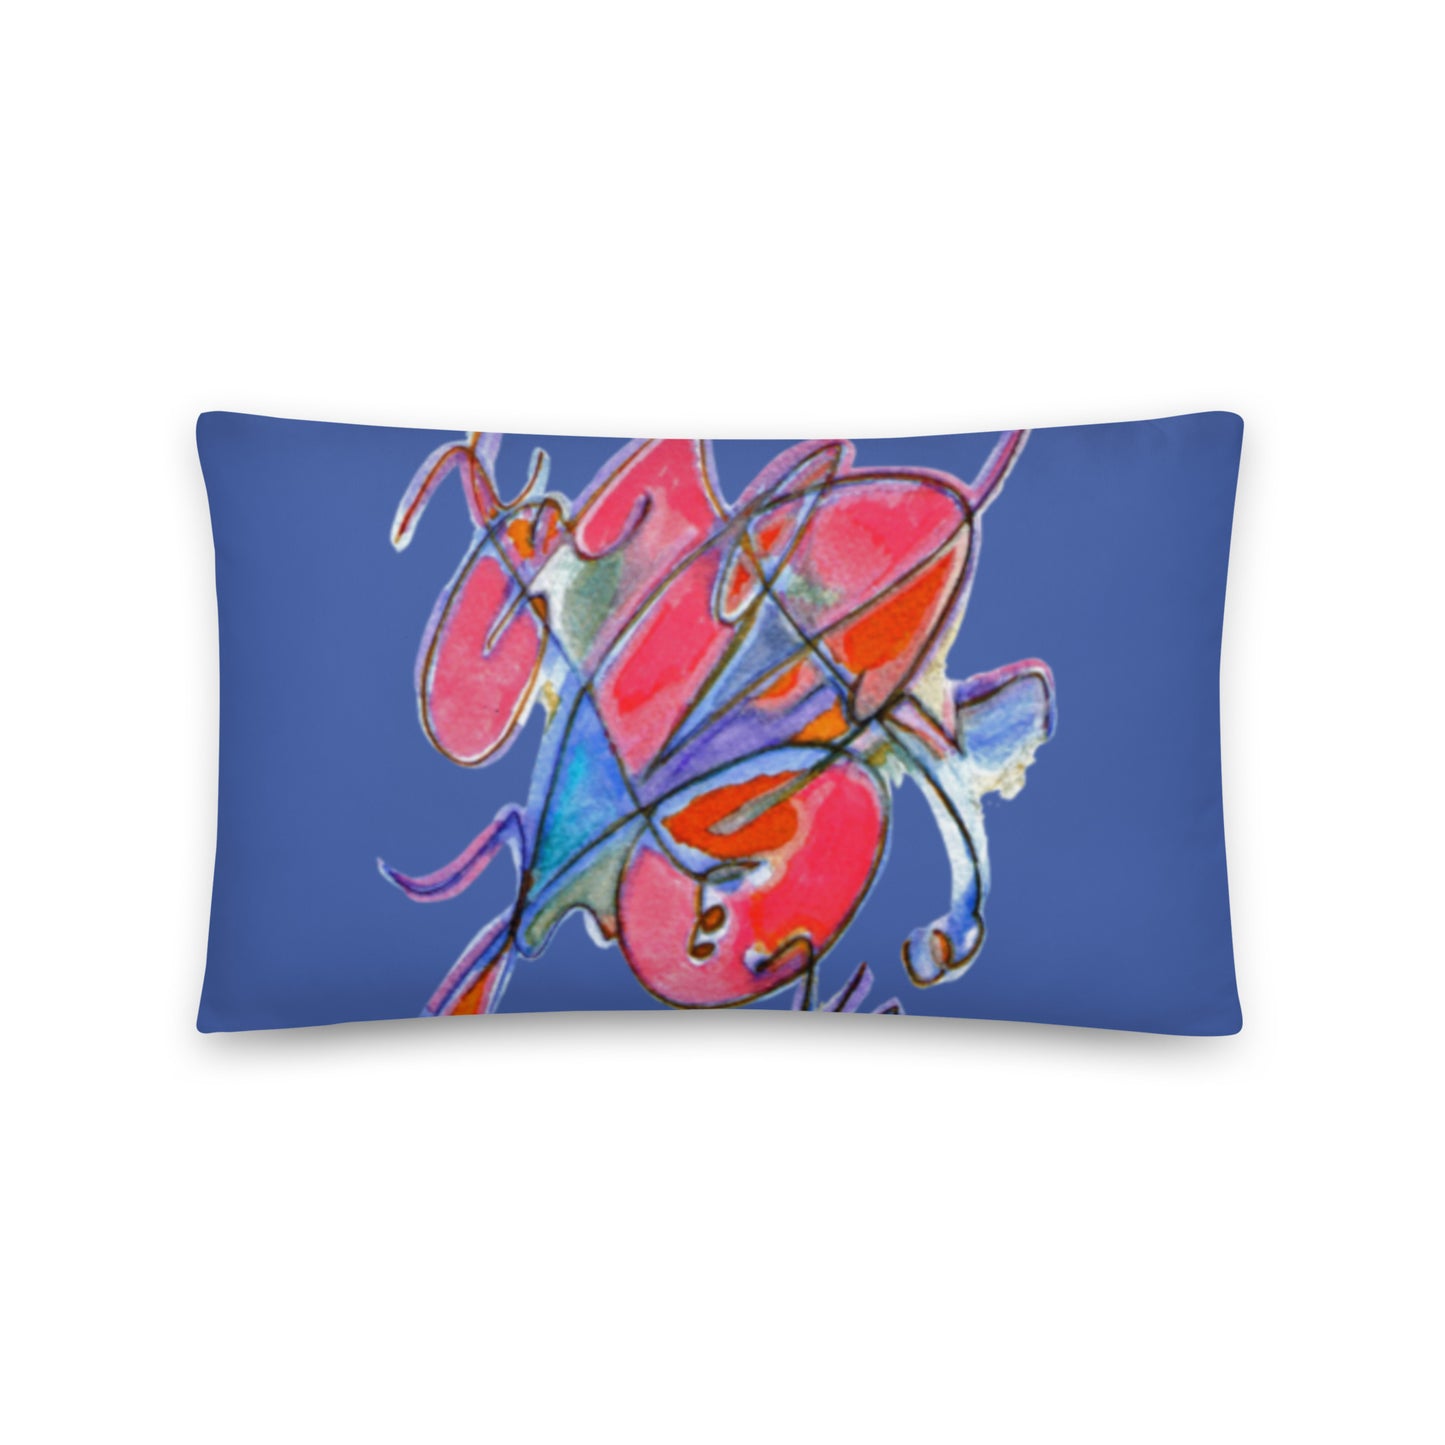 Opposites Abstract  Pillow